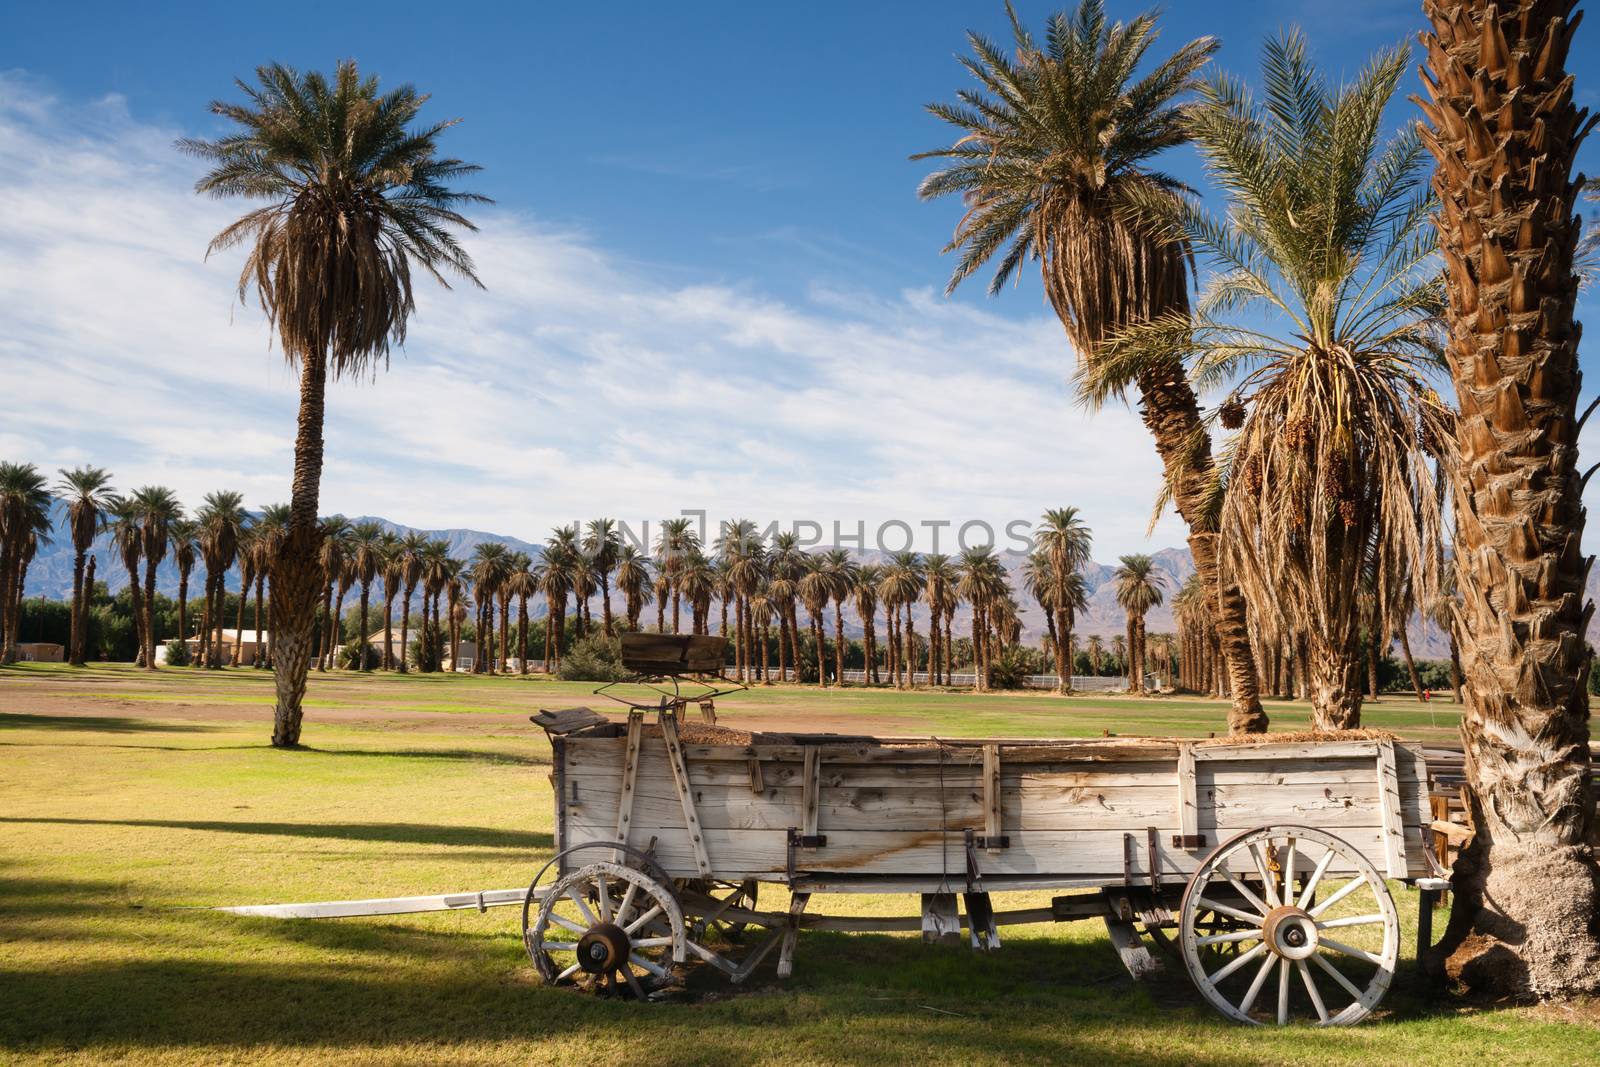 An old buckboard wagon stands near the golf cource in Death Valley